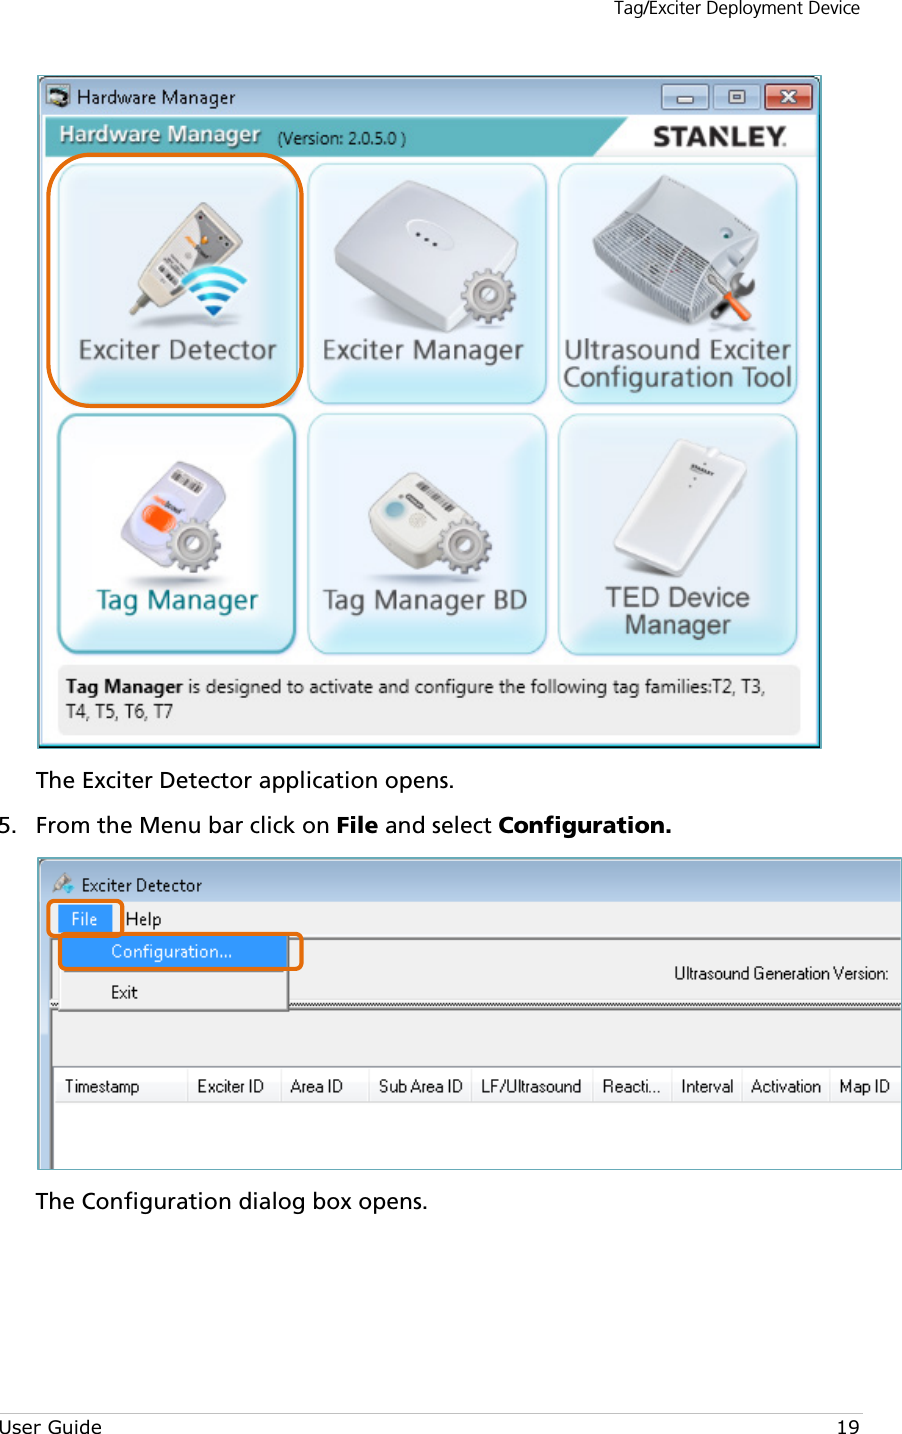 Tag/Exciter Deployment Device User Guide 19  The Exciter Detector application opens.  From the Menu bar click on File and select Configuration. 5. The Configuration dialog box opens. 